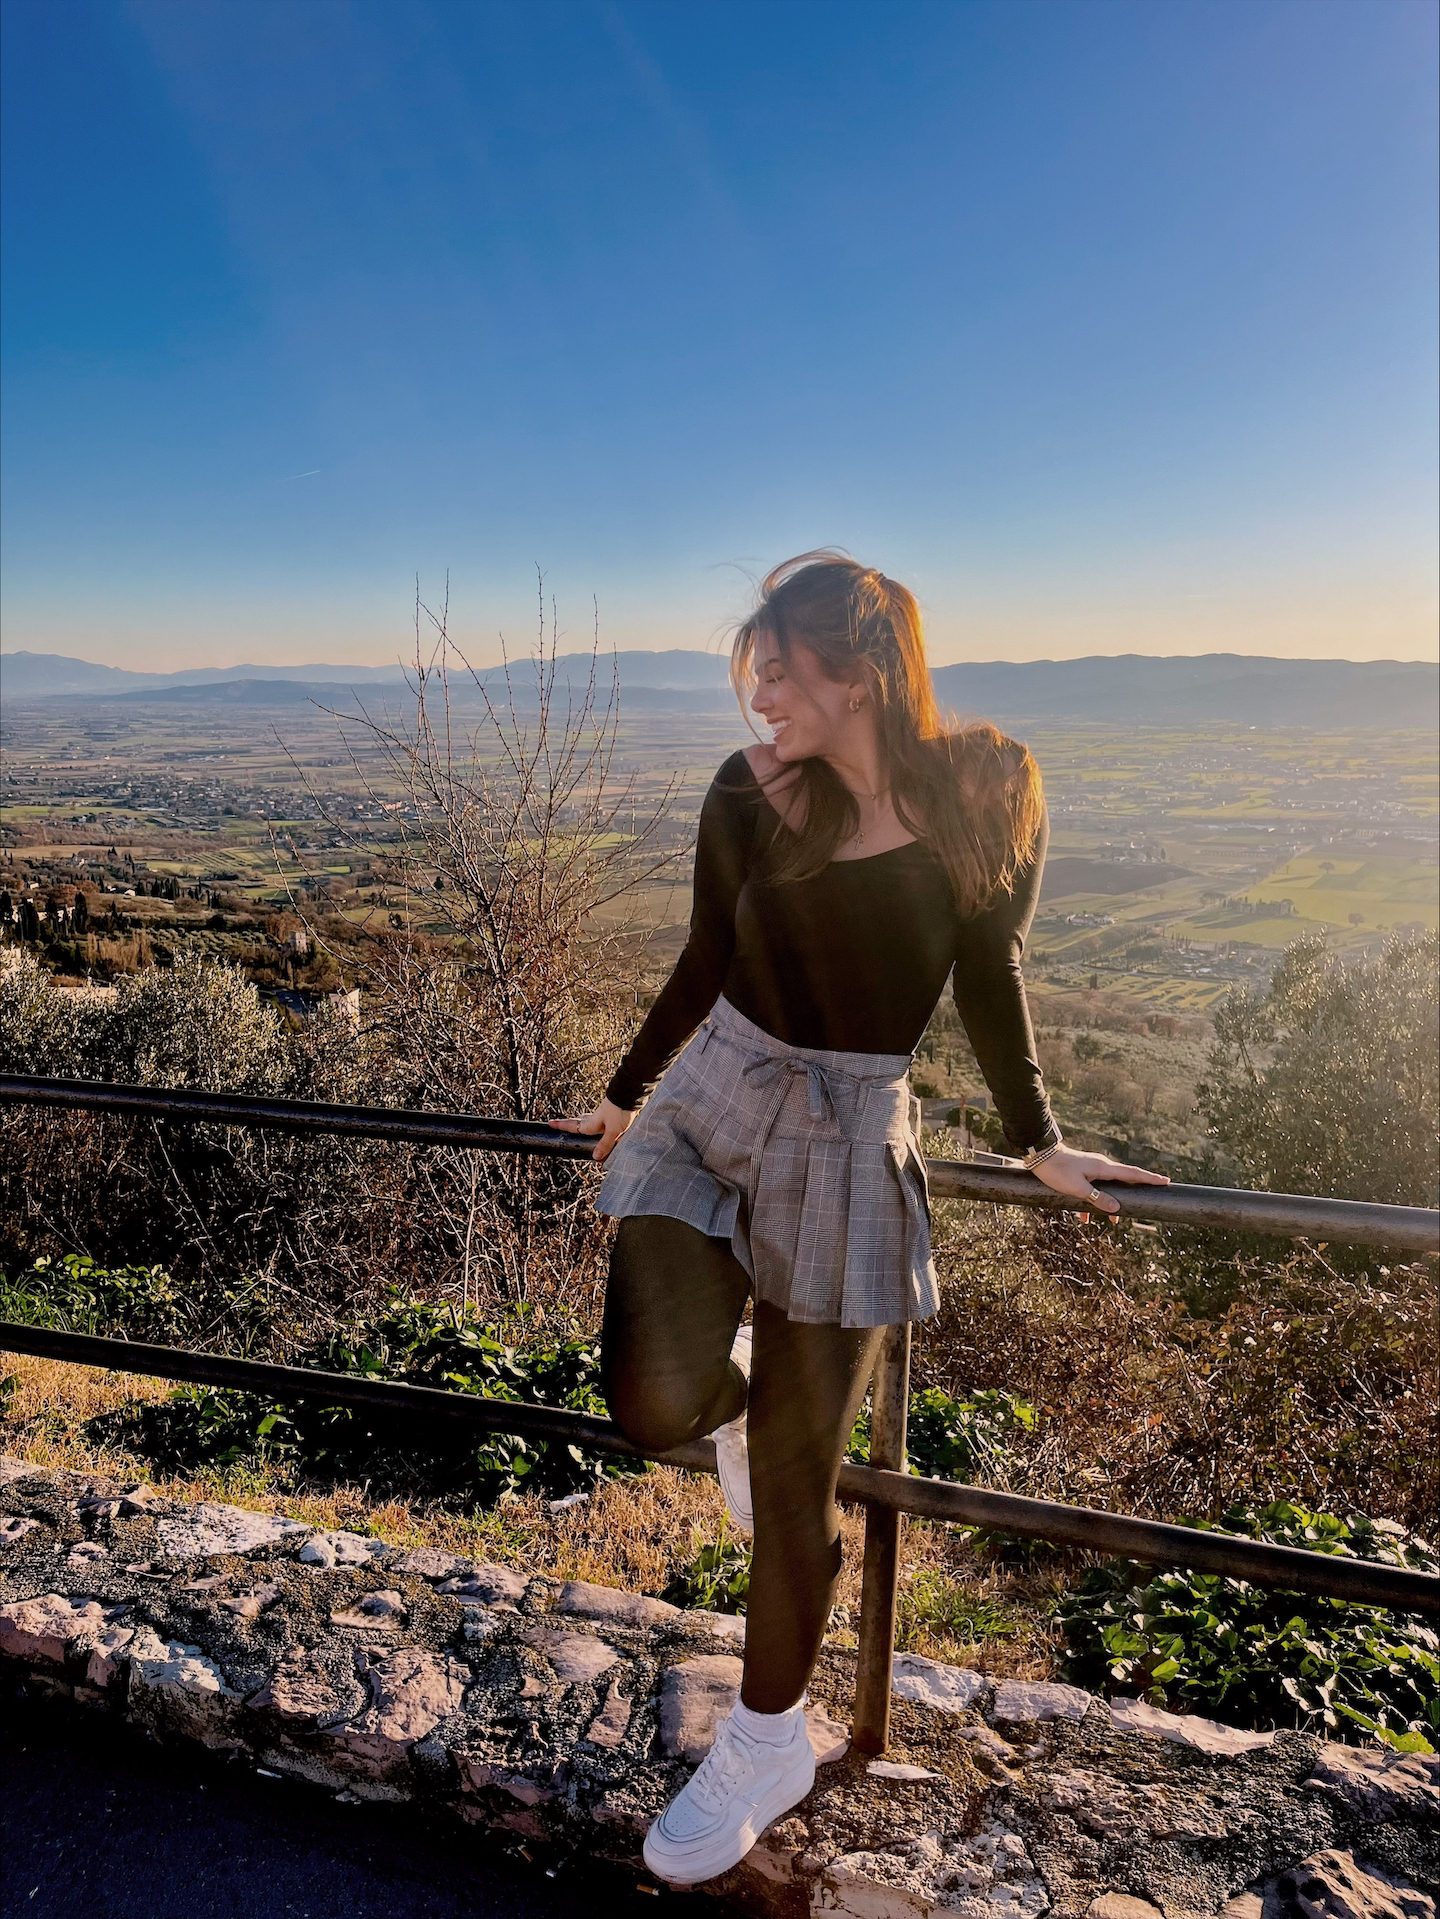 Lauren and the serene charm of Perugia in the background.